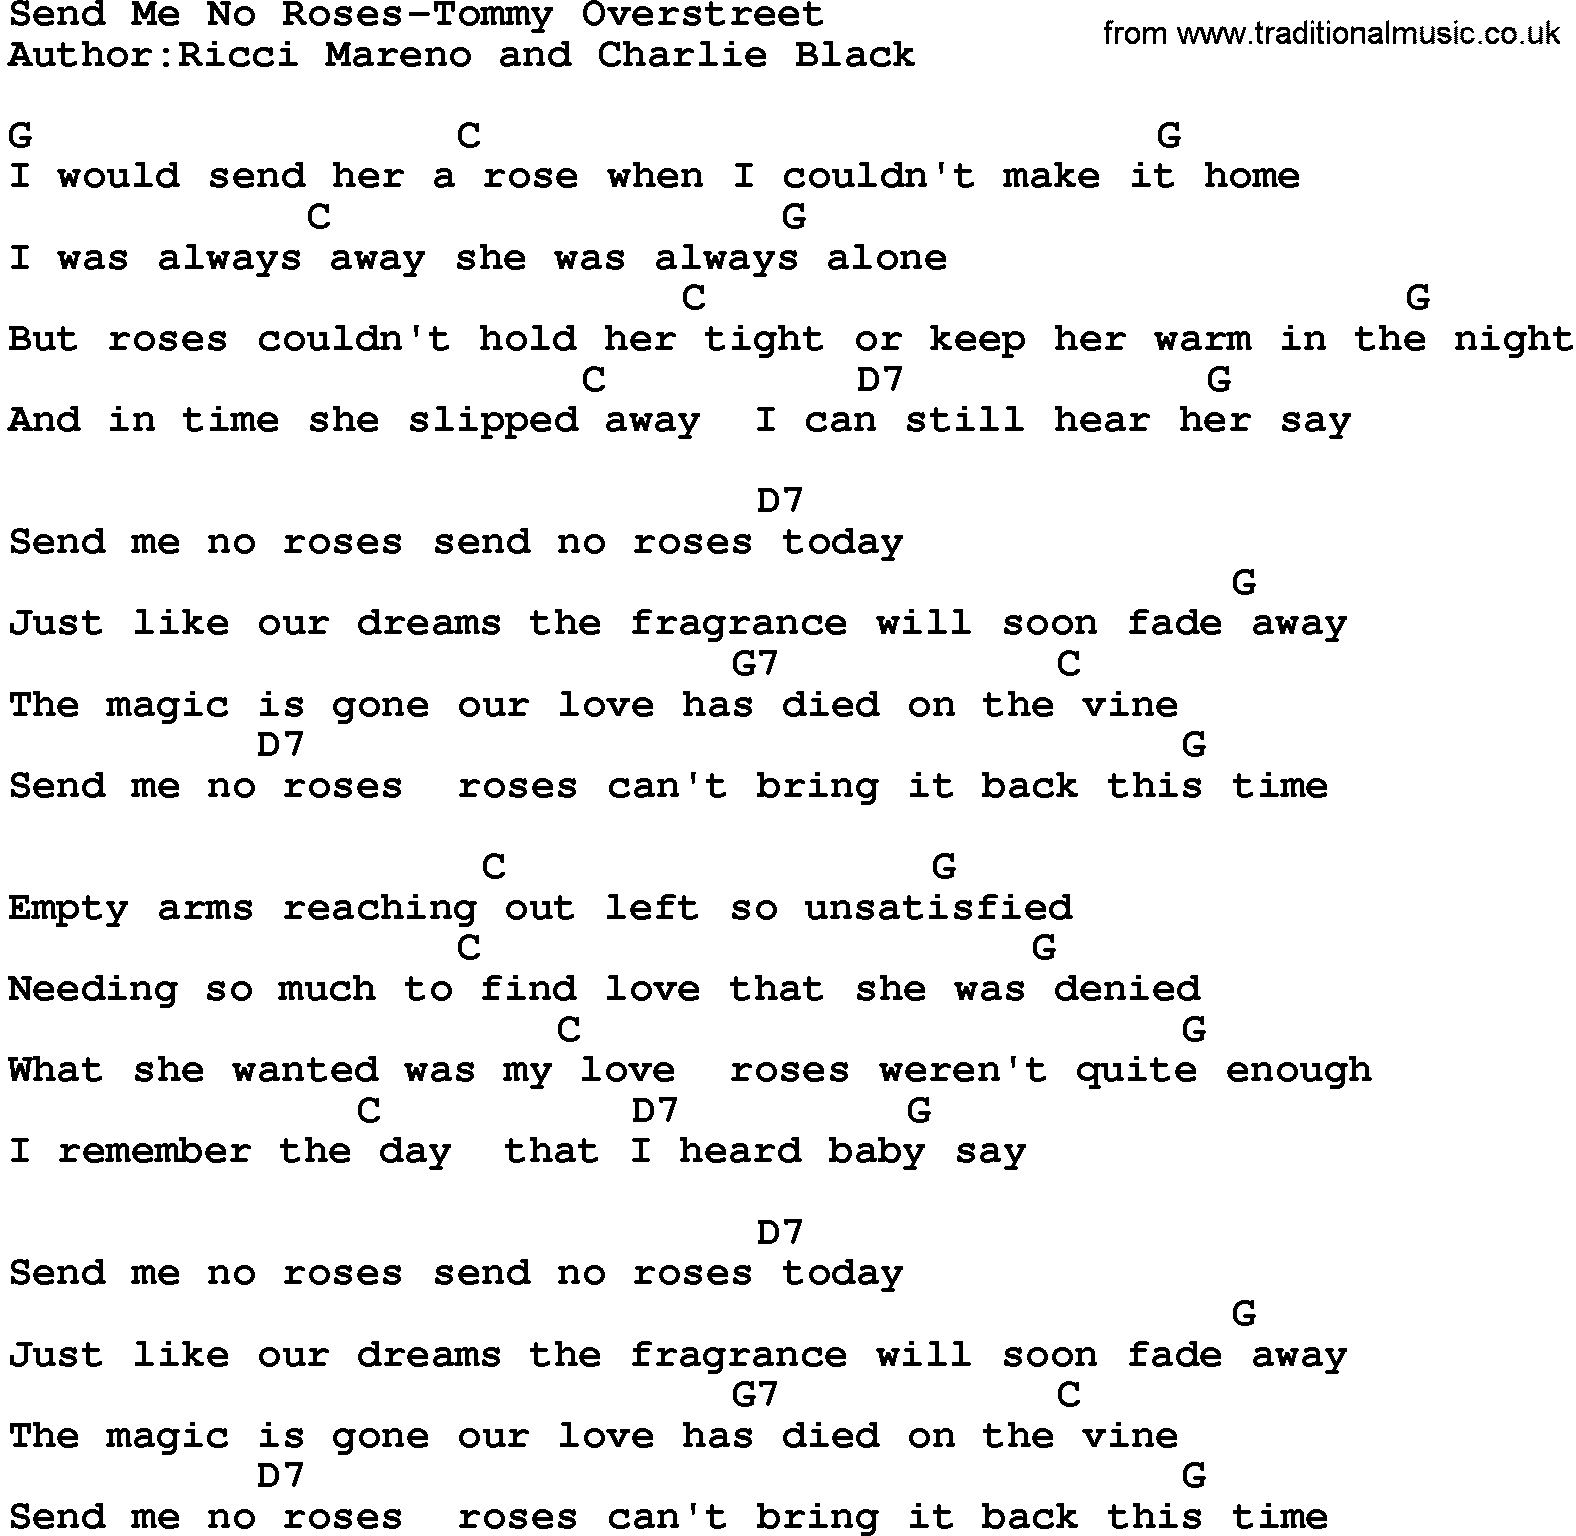 Country music song: Send Me No Roses-Tommy Overstreet lyrics and chords